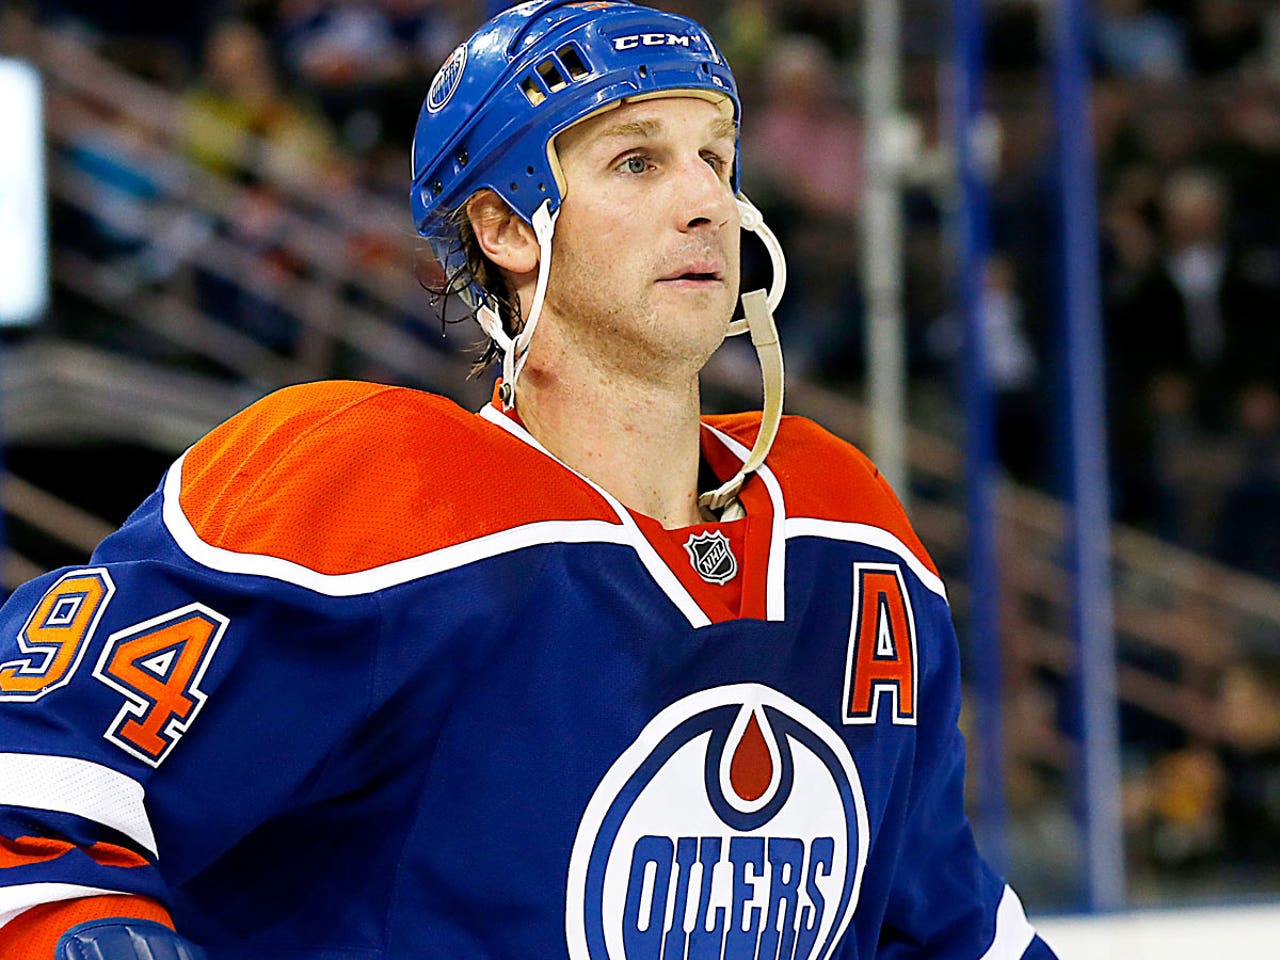 In Photos: Ryan Smyth plays his final game in the NHL - Edmonton